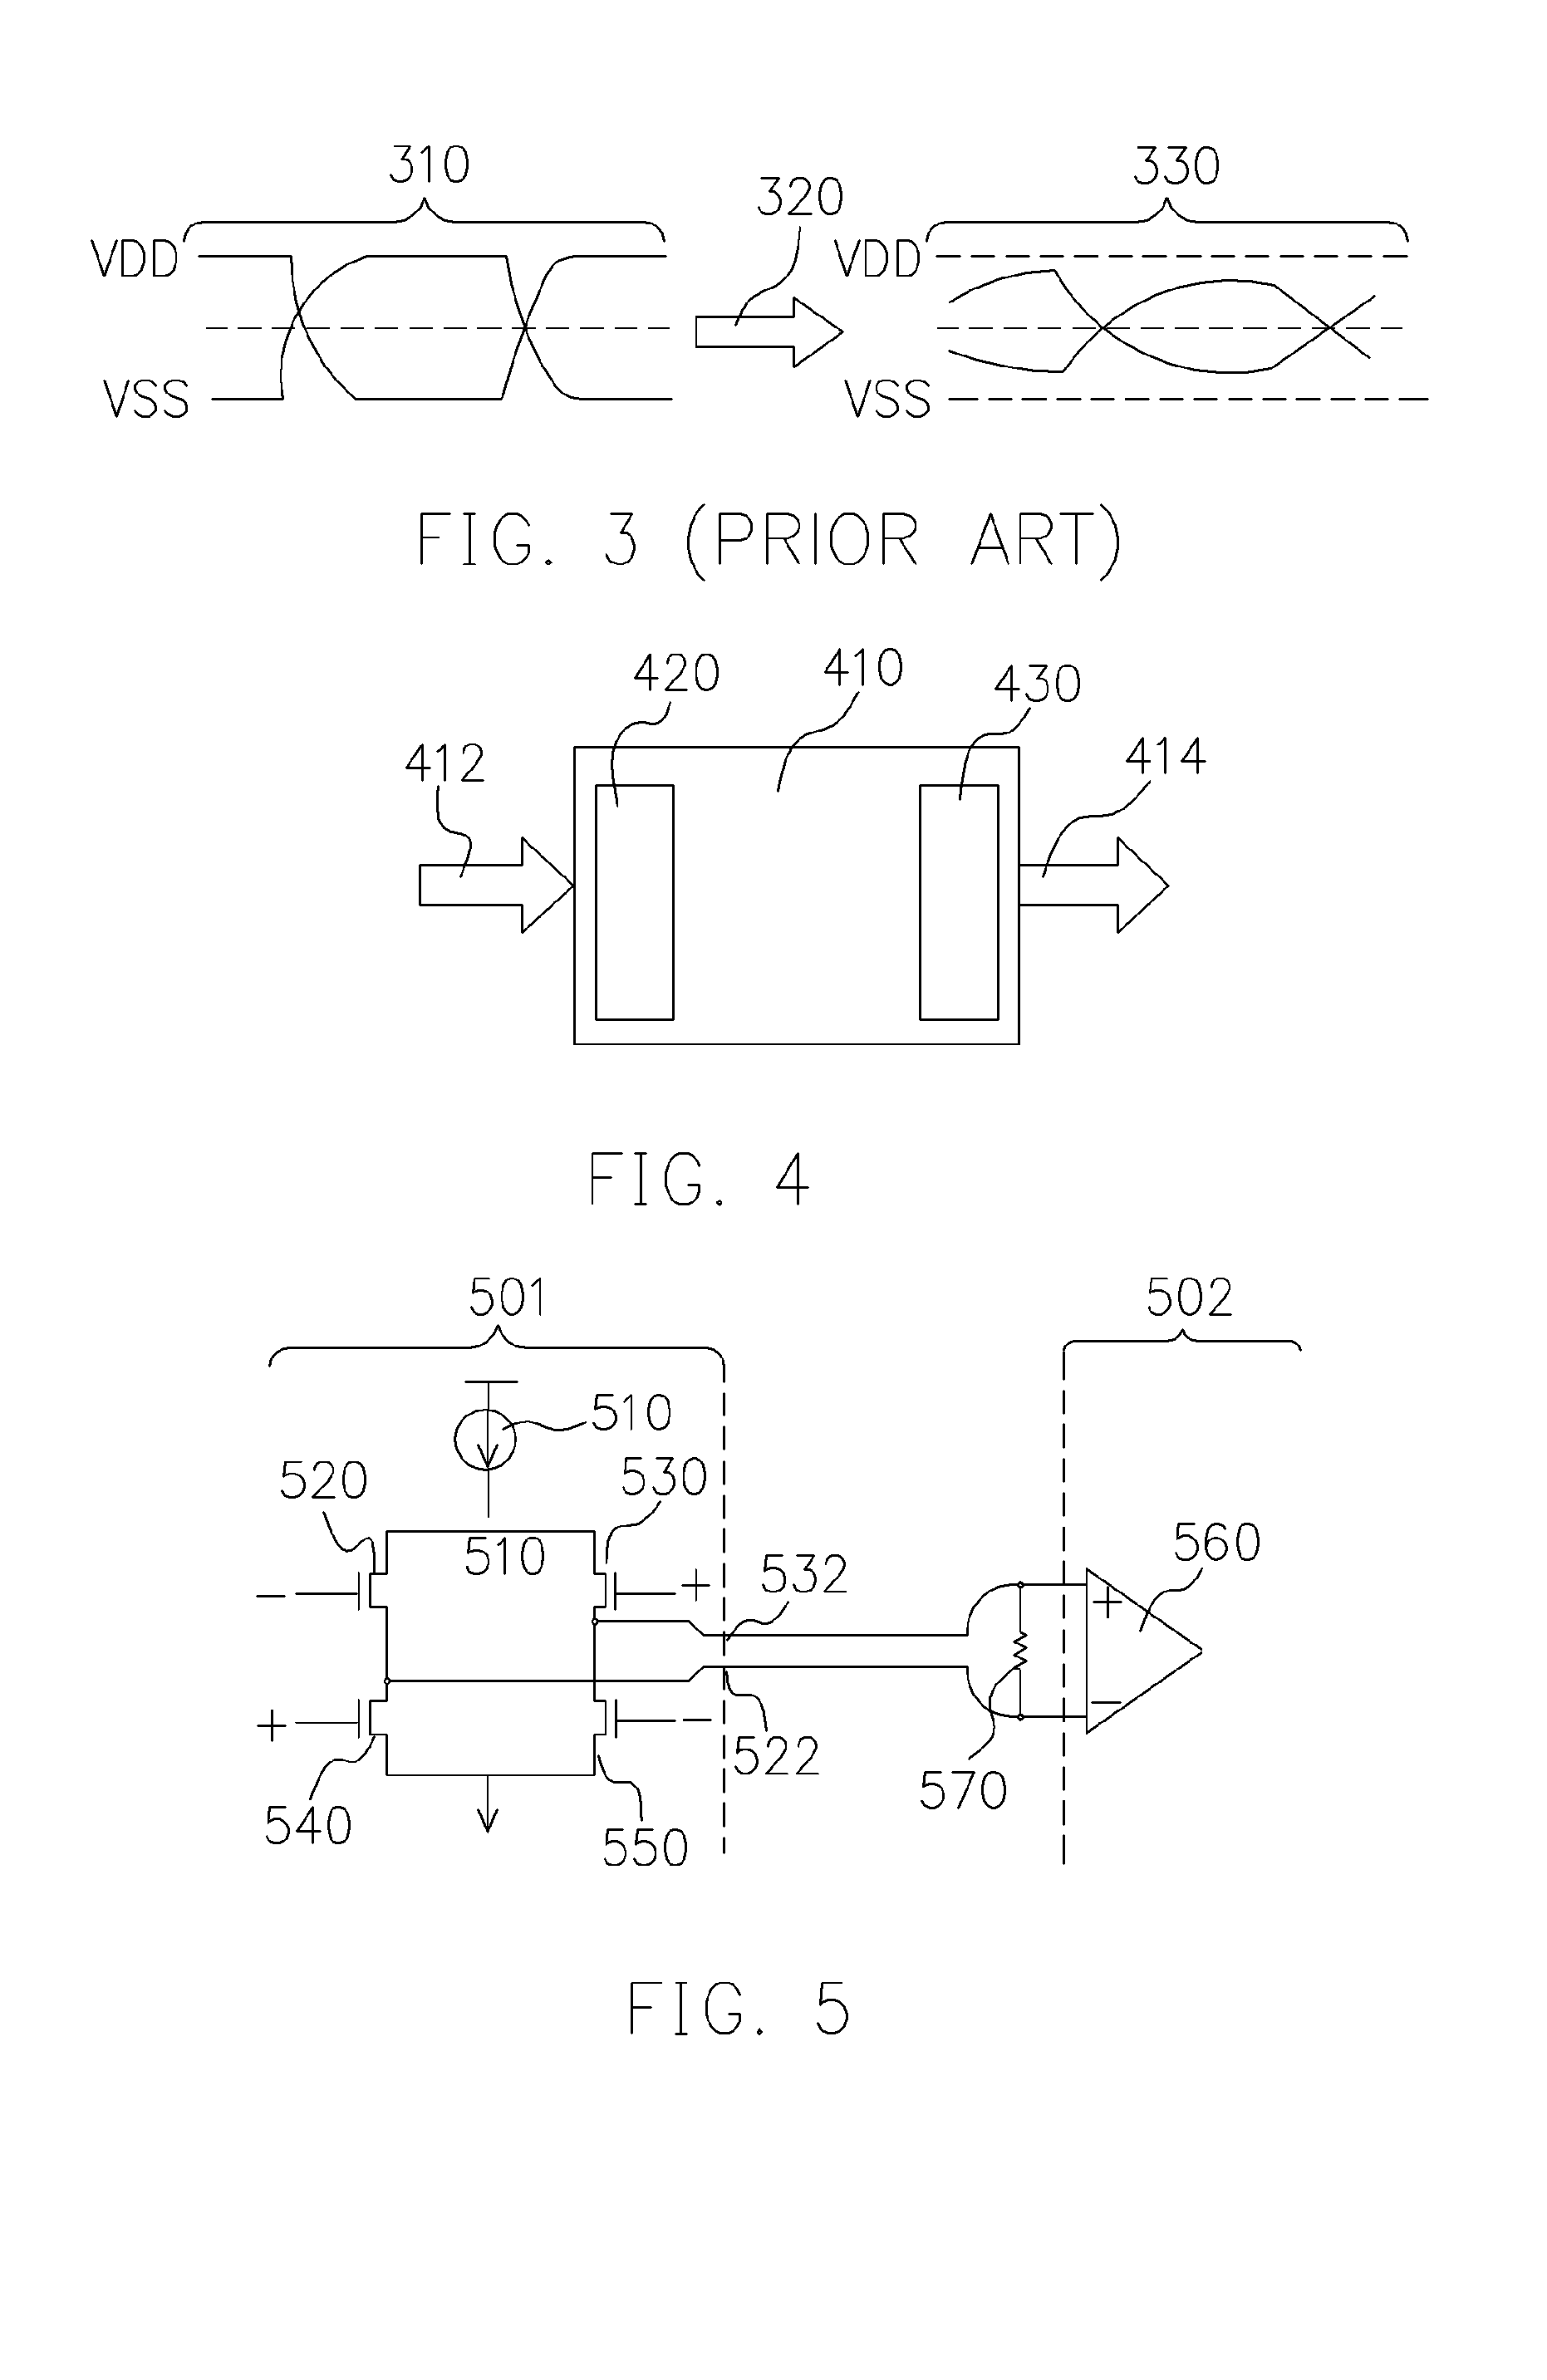 [cascade driving circuit for liquid crystal display]